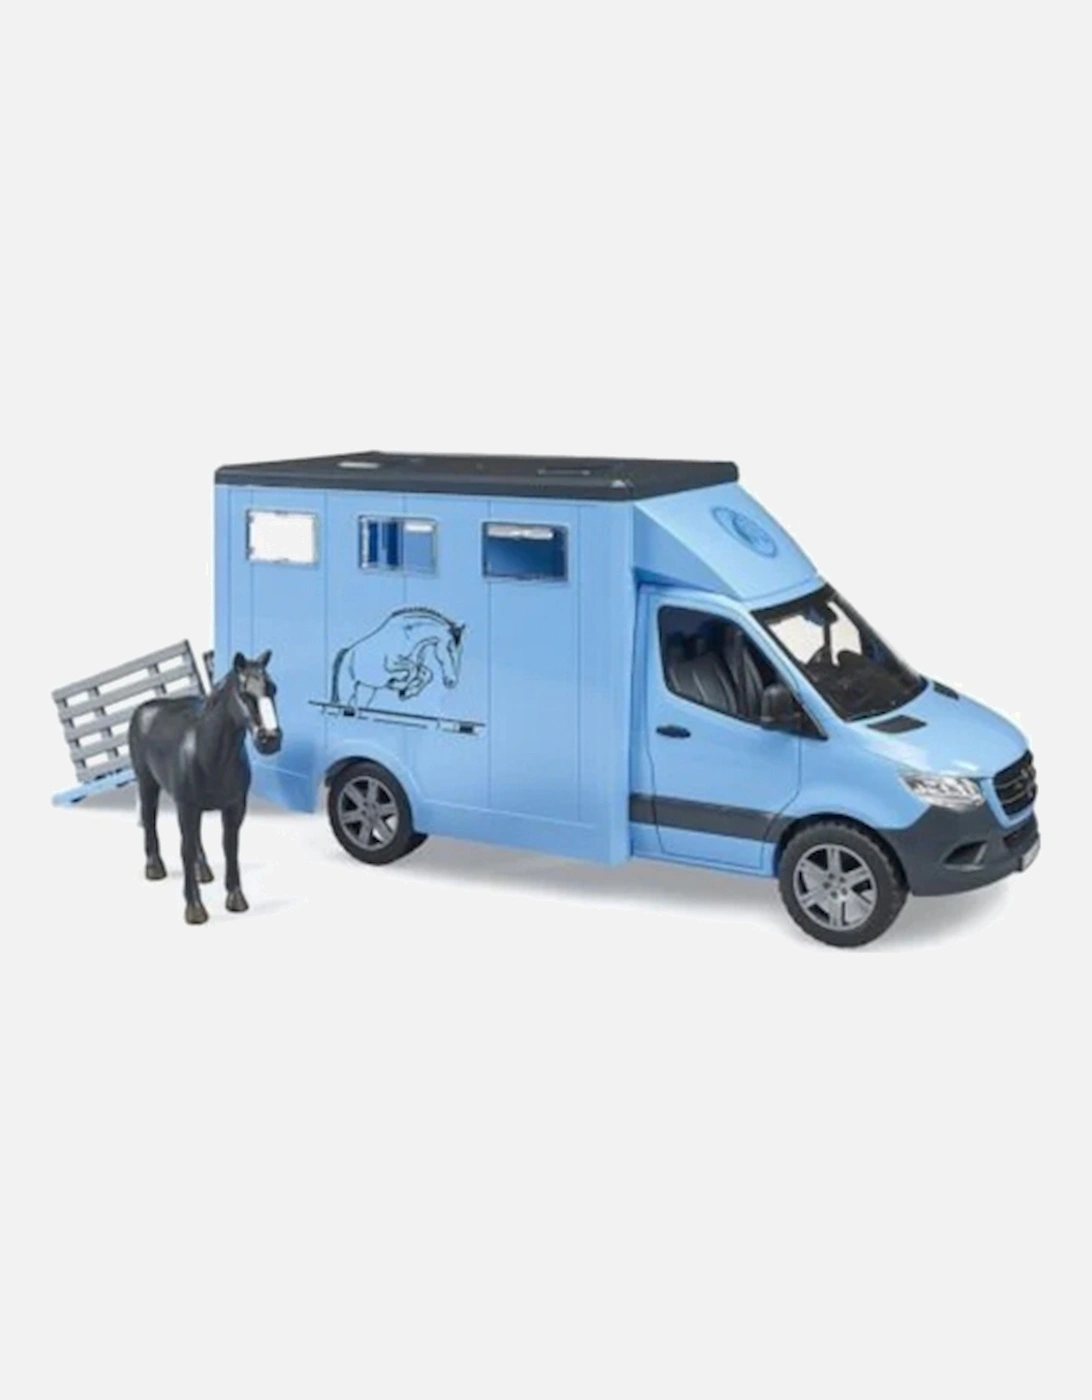 MB Sprinter Animal Transporter with Horse, 4 of 3